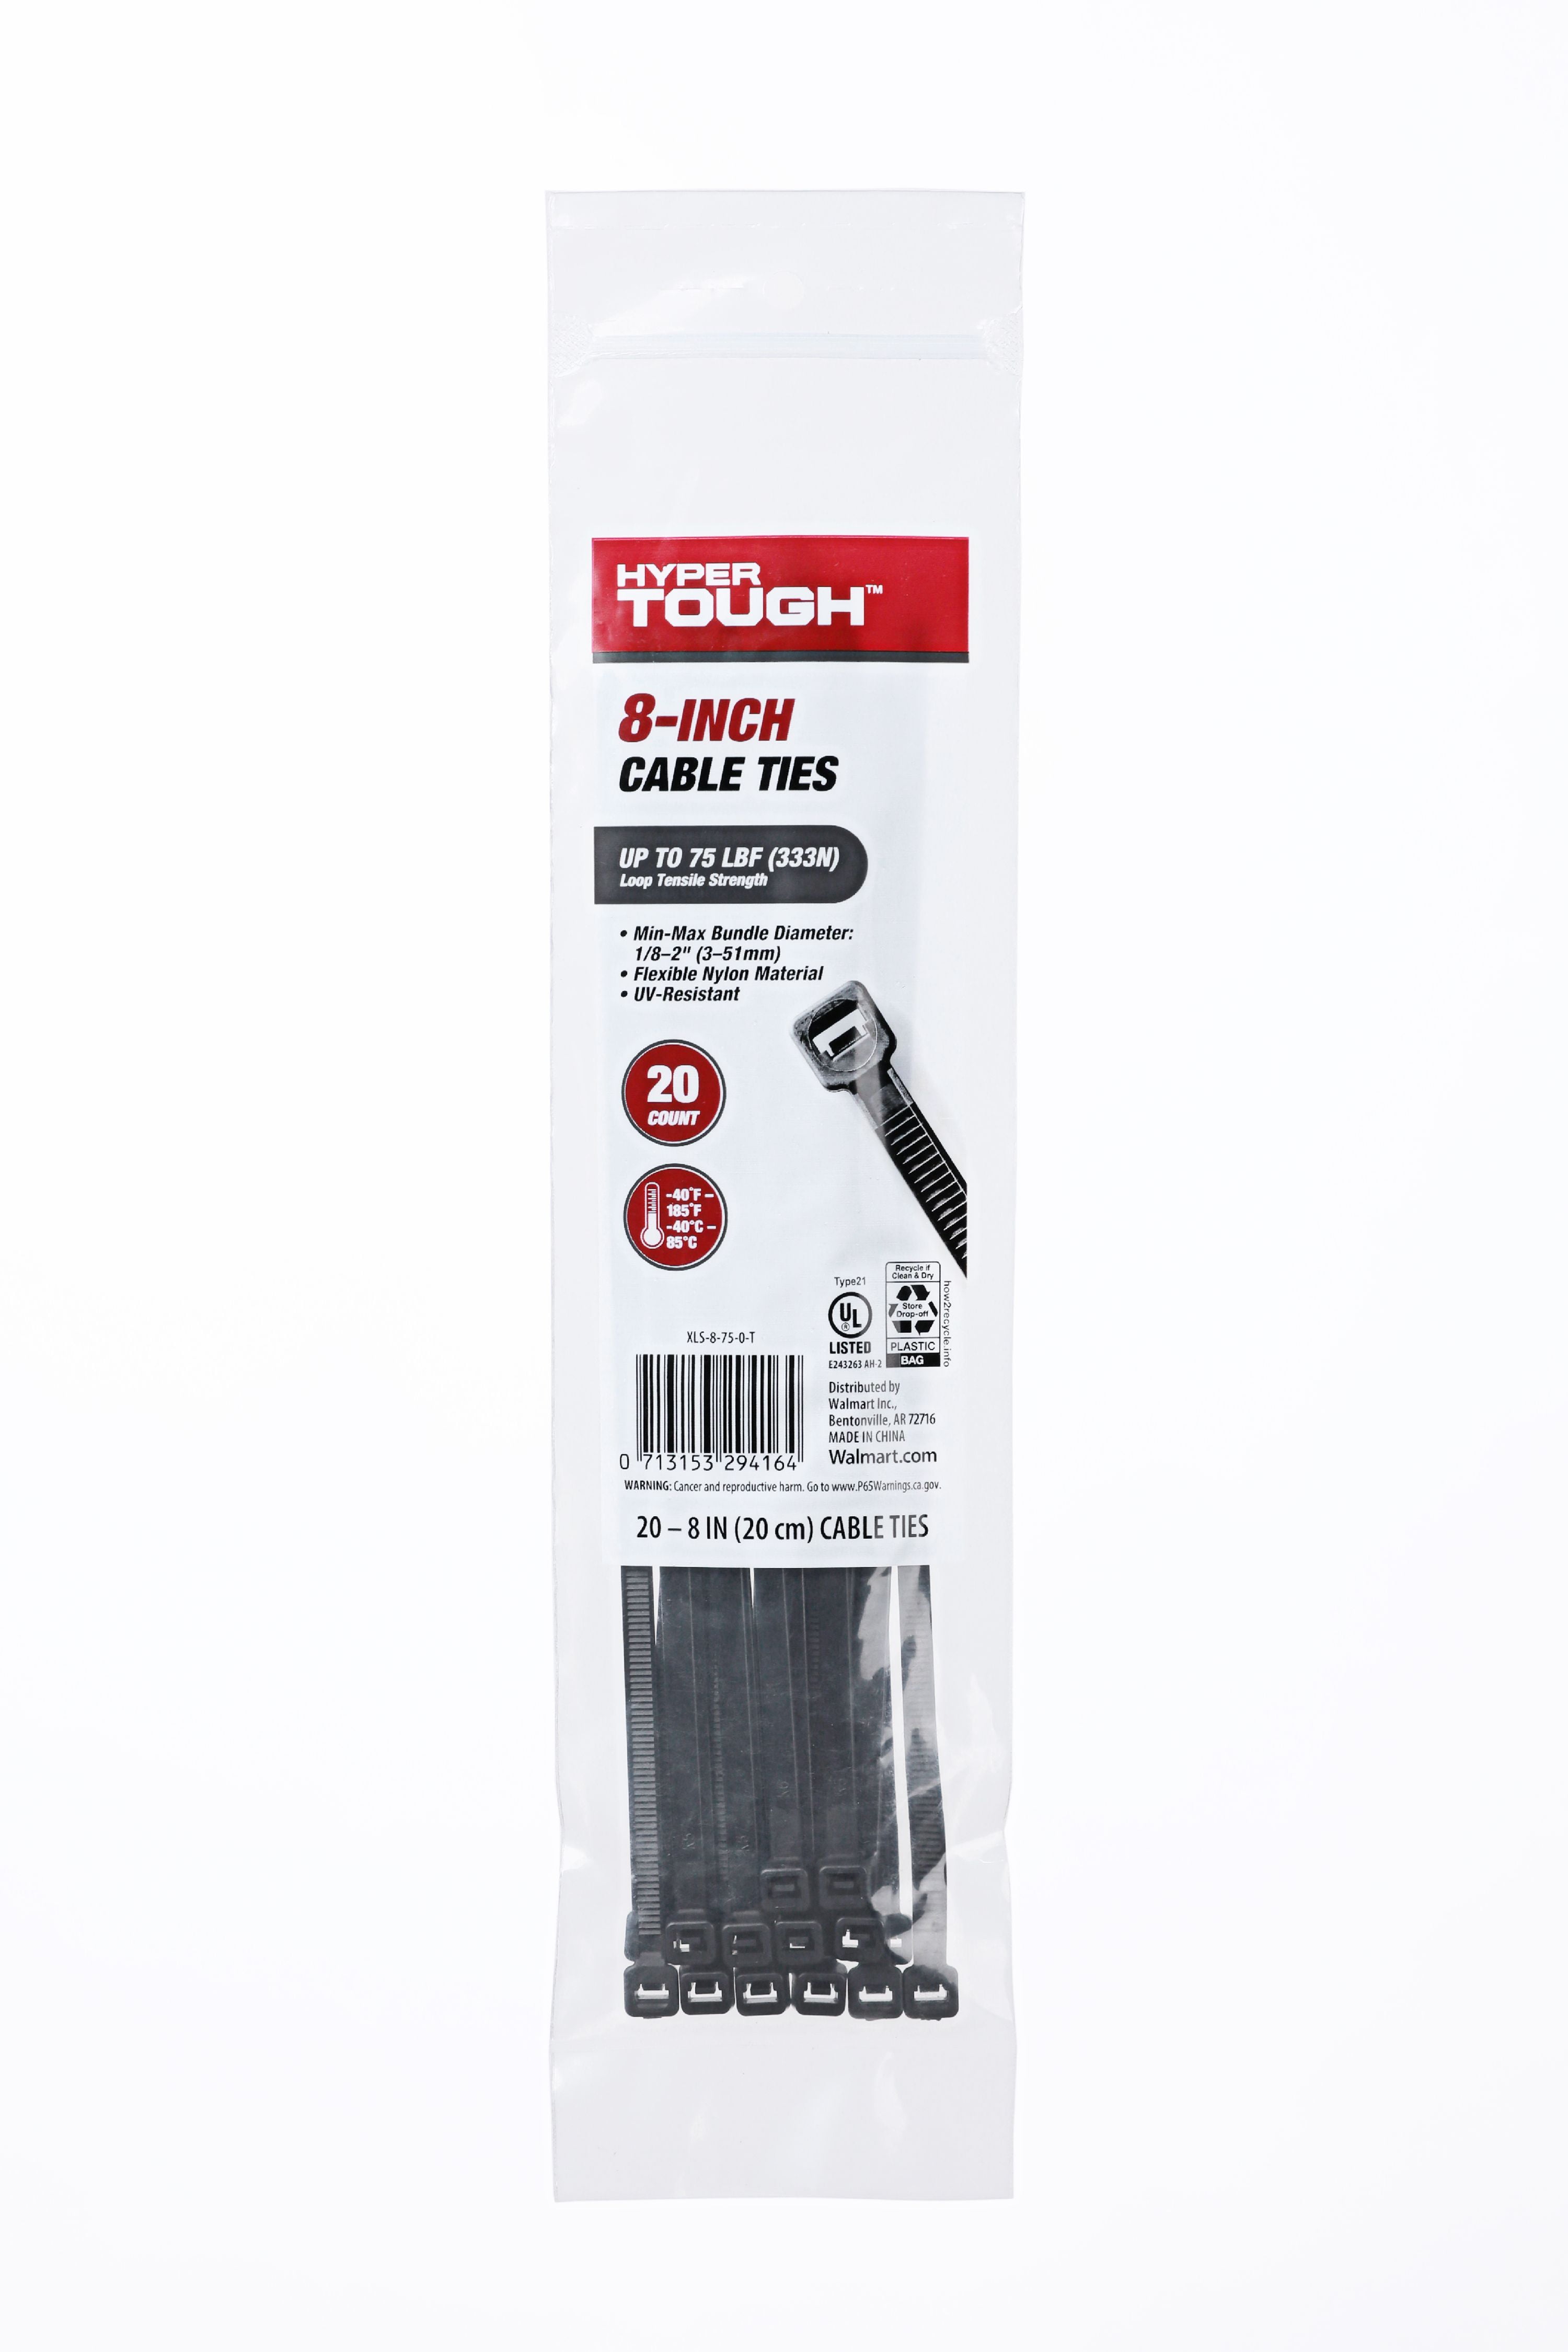 New Trisonic 4" Cable Ties 200 Count 